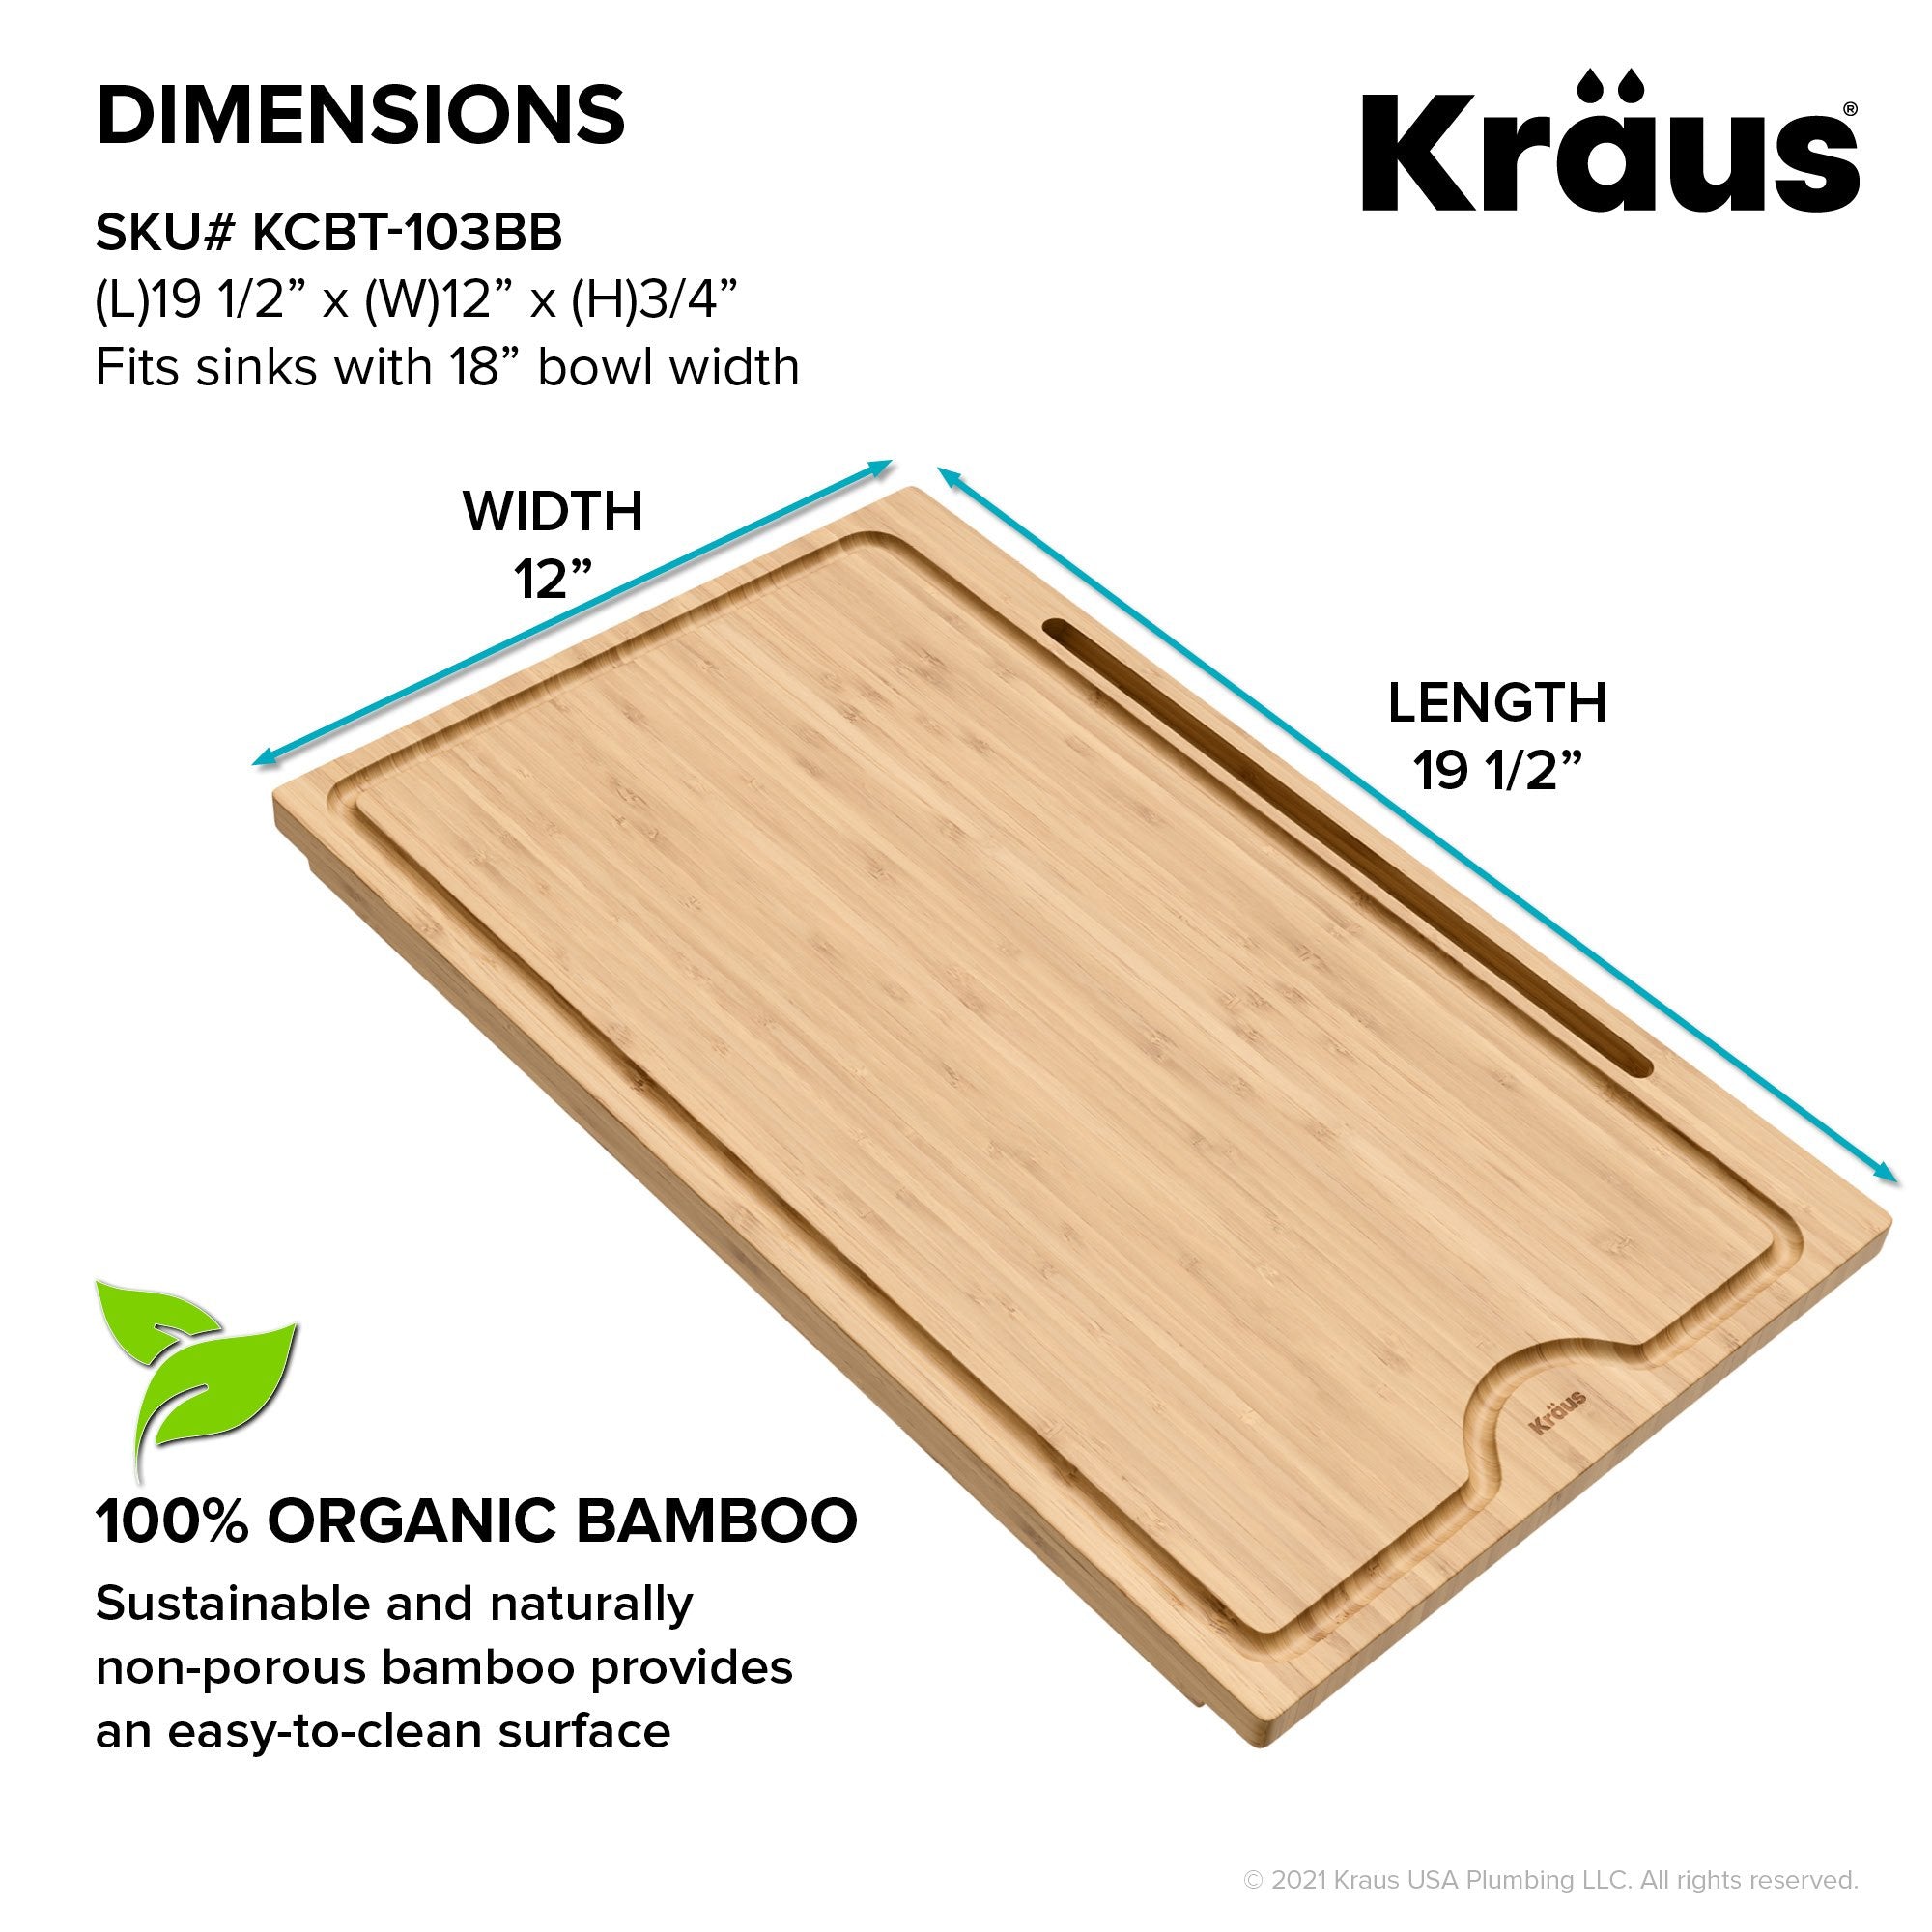 Bamboo Cutting Board with Mobile Device Holder for most Standard